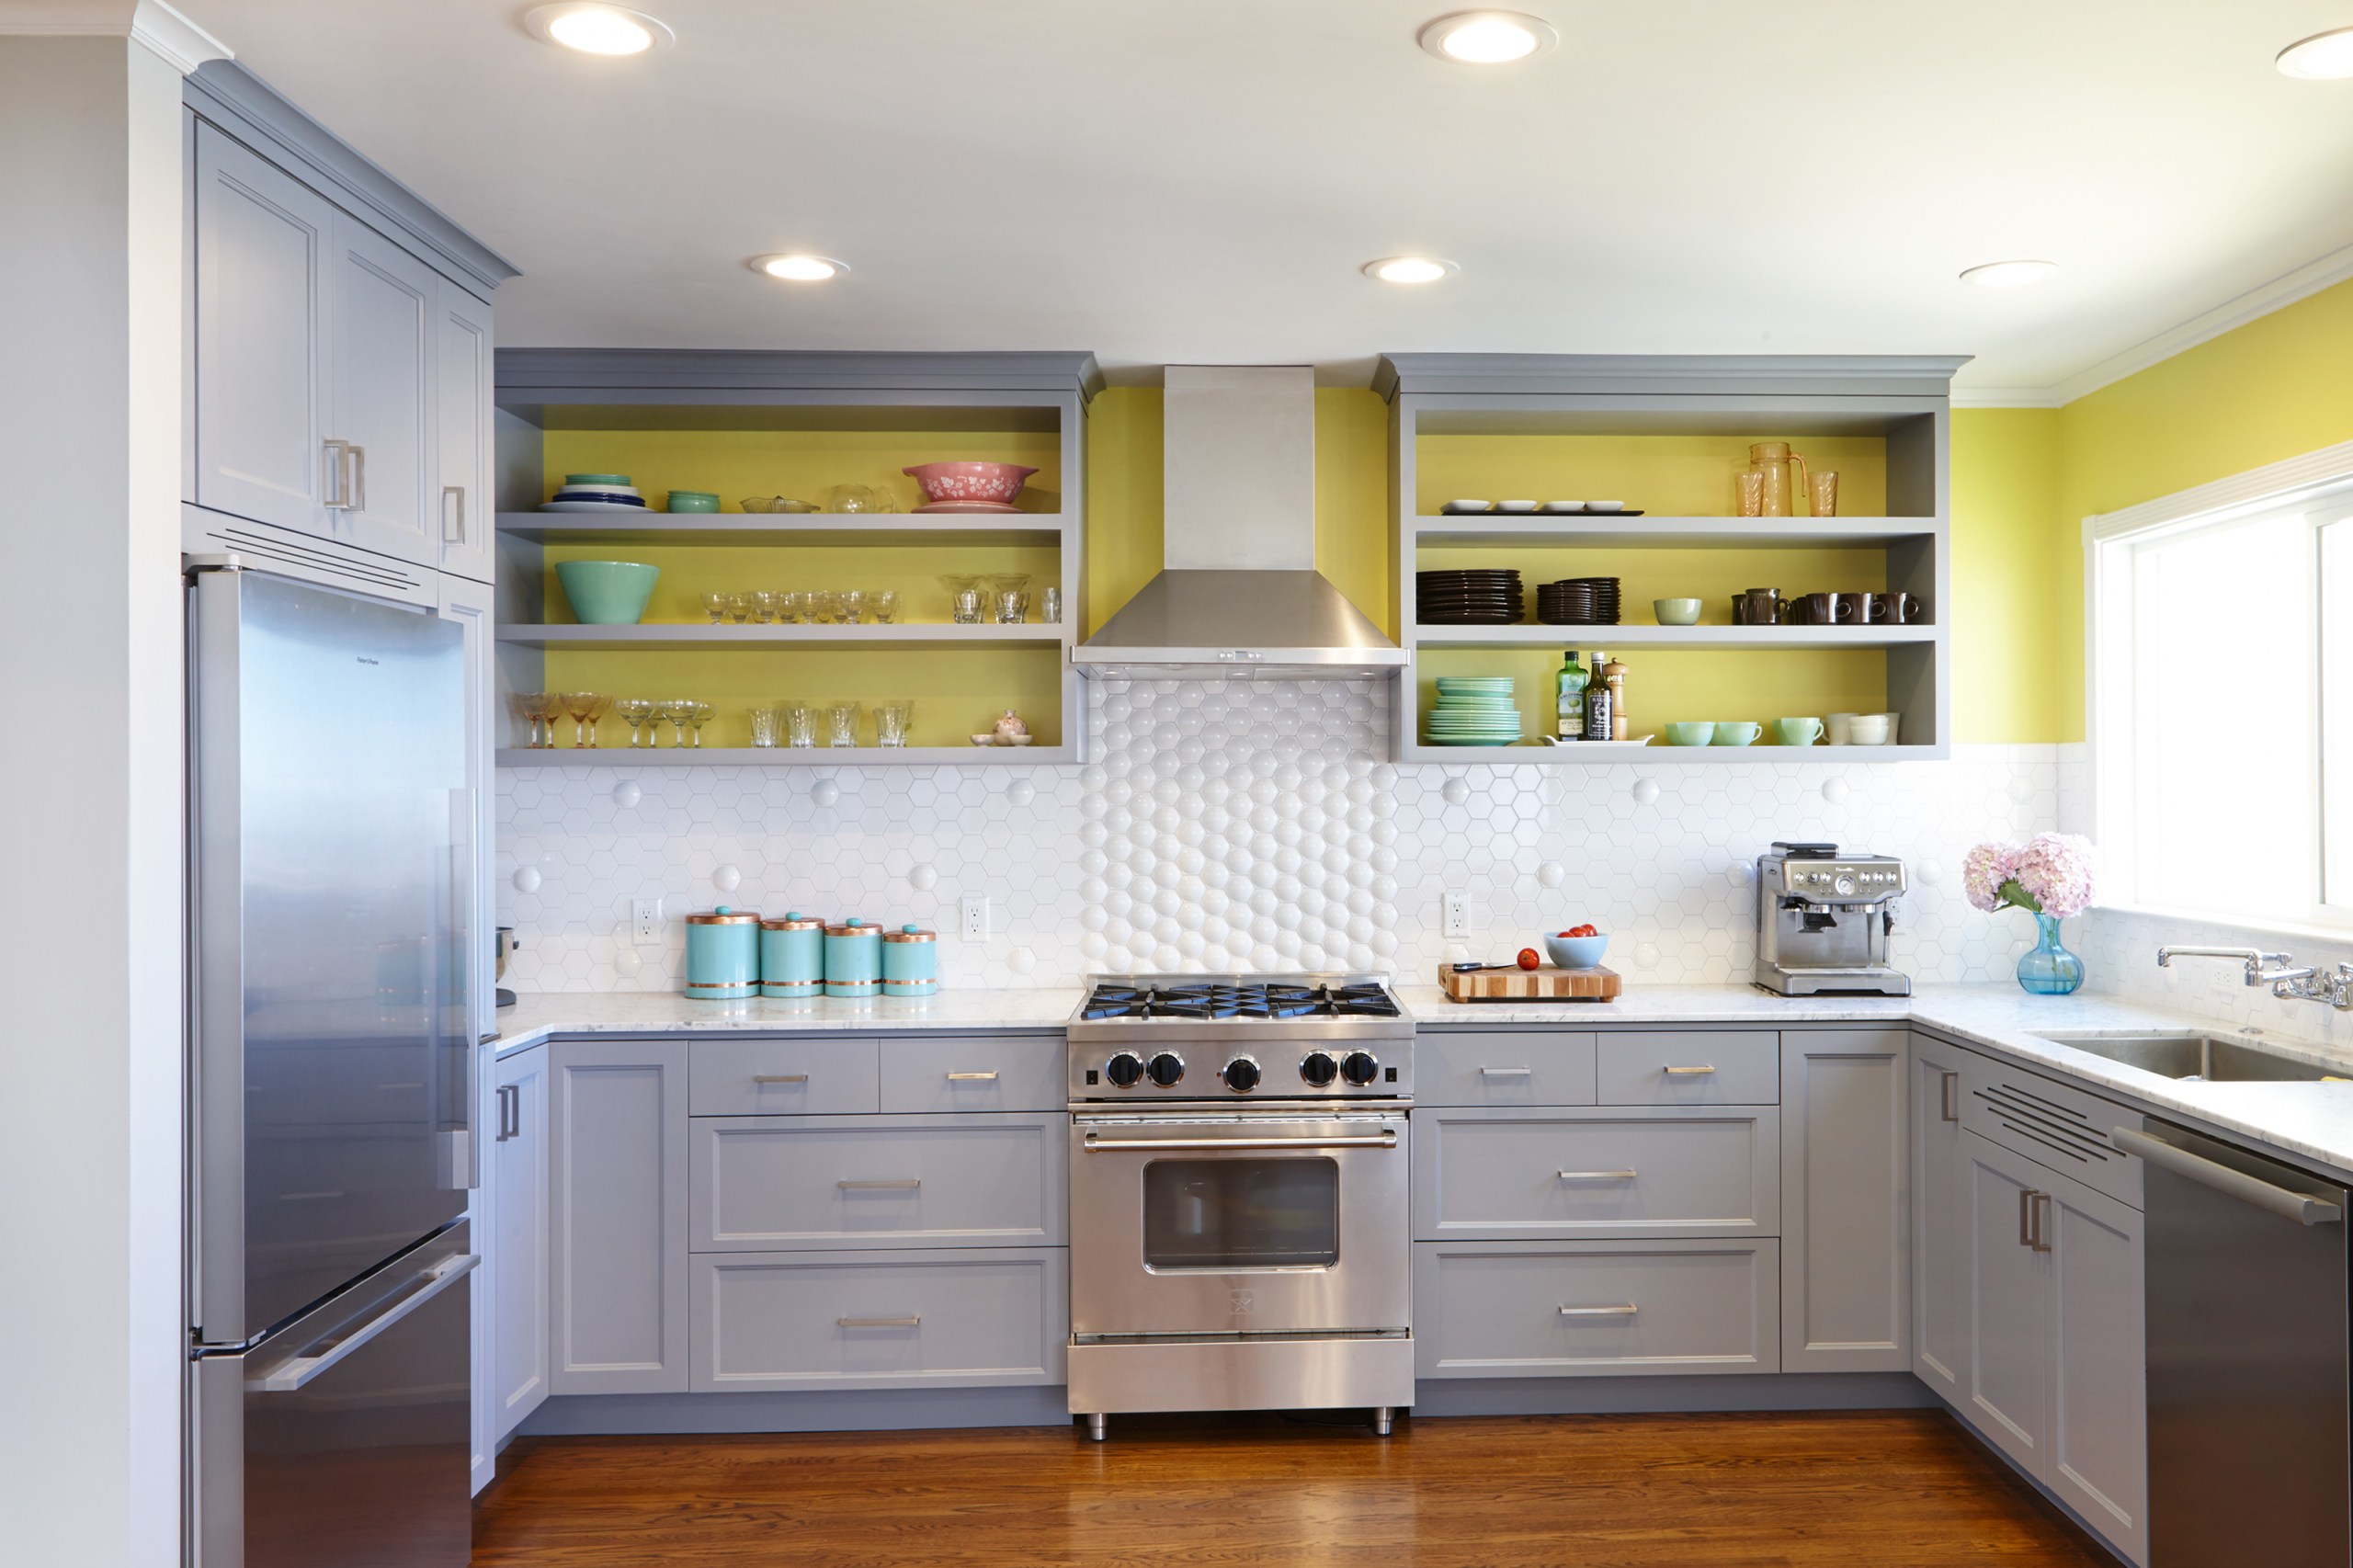 Best Paint for Kitchen Cabinets | Paint for Kitchens